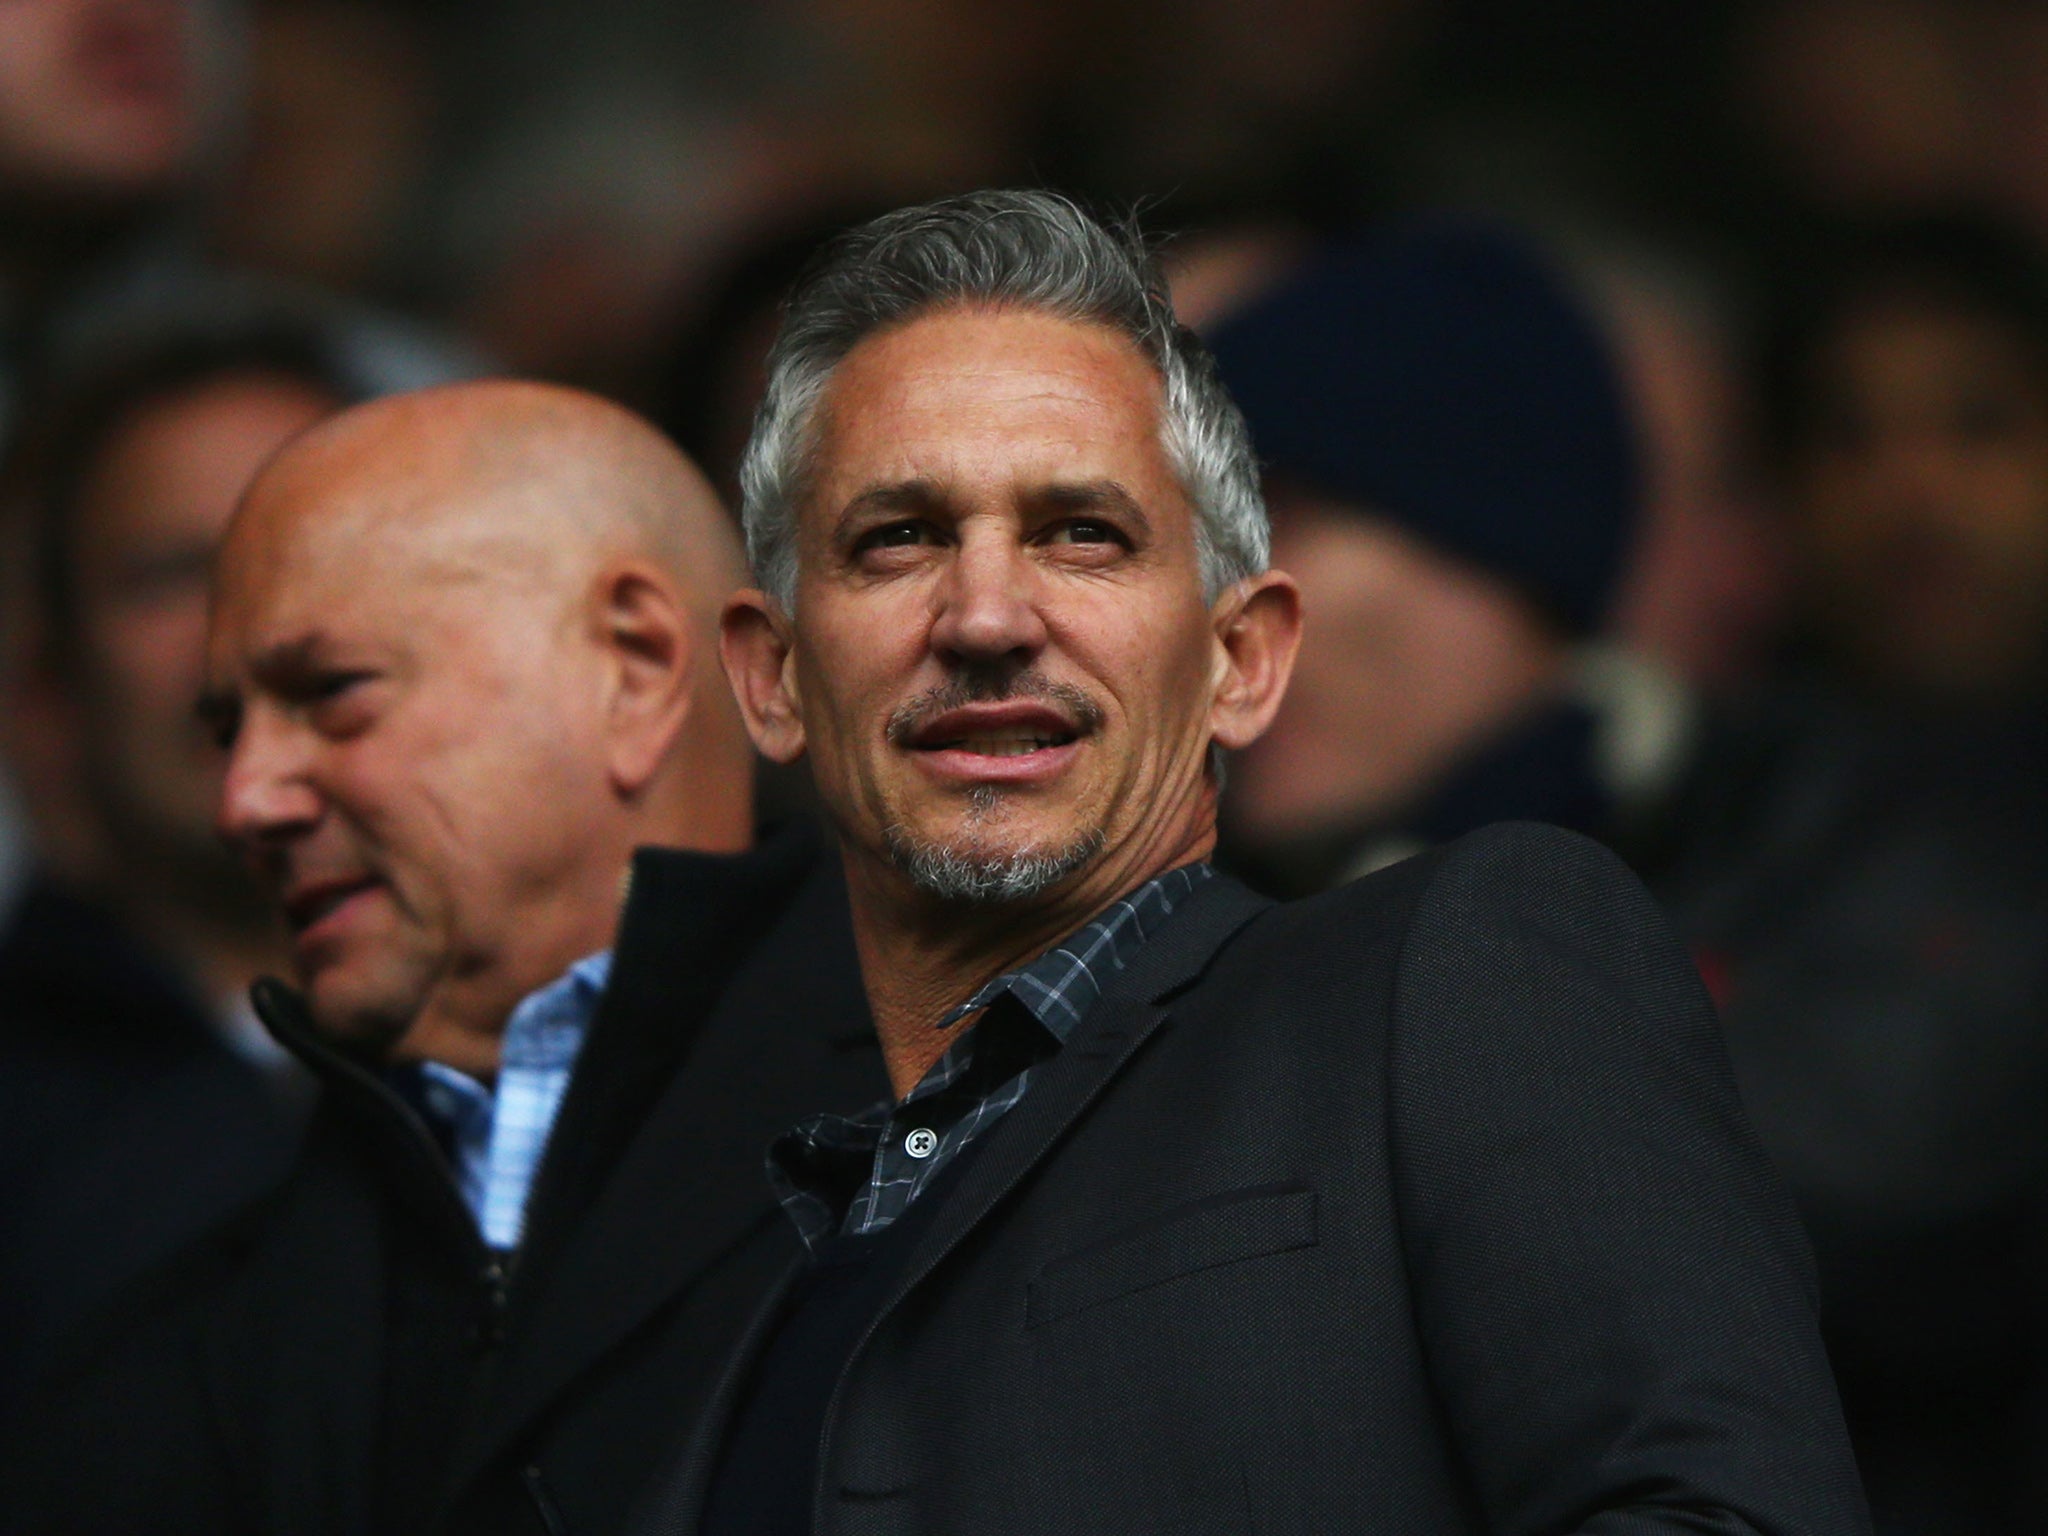 Lineker's remarks have attracted censure on social media